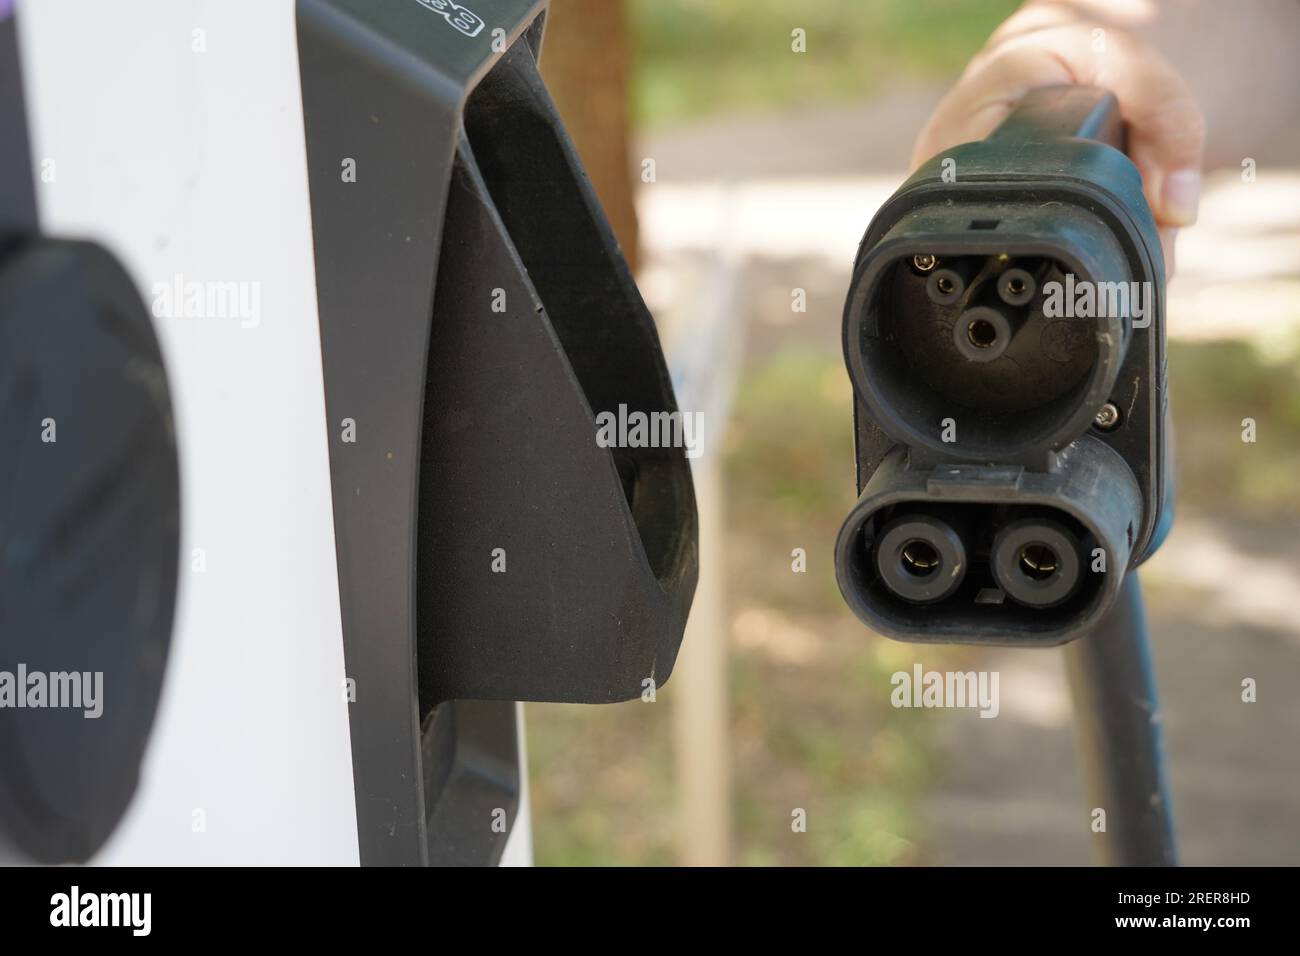 DC charging connector or plug CCS 2 type using for charging electric cars . Stock Photo